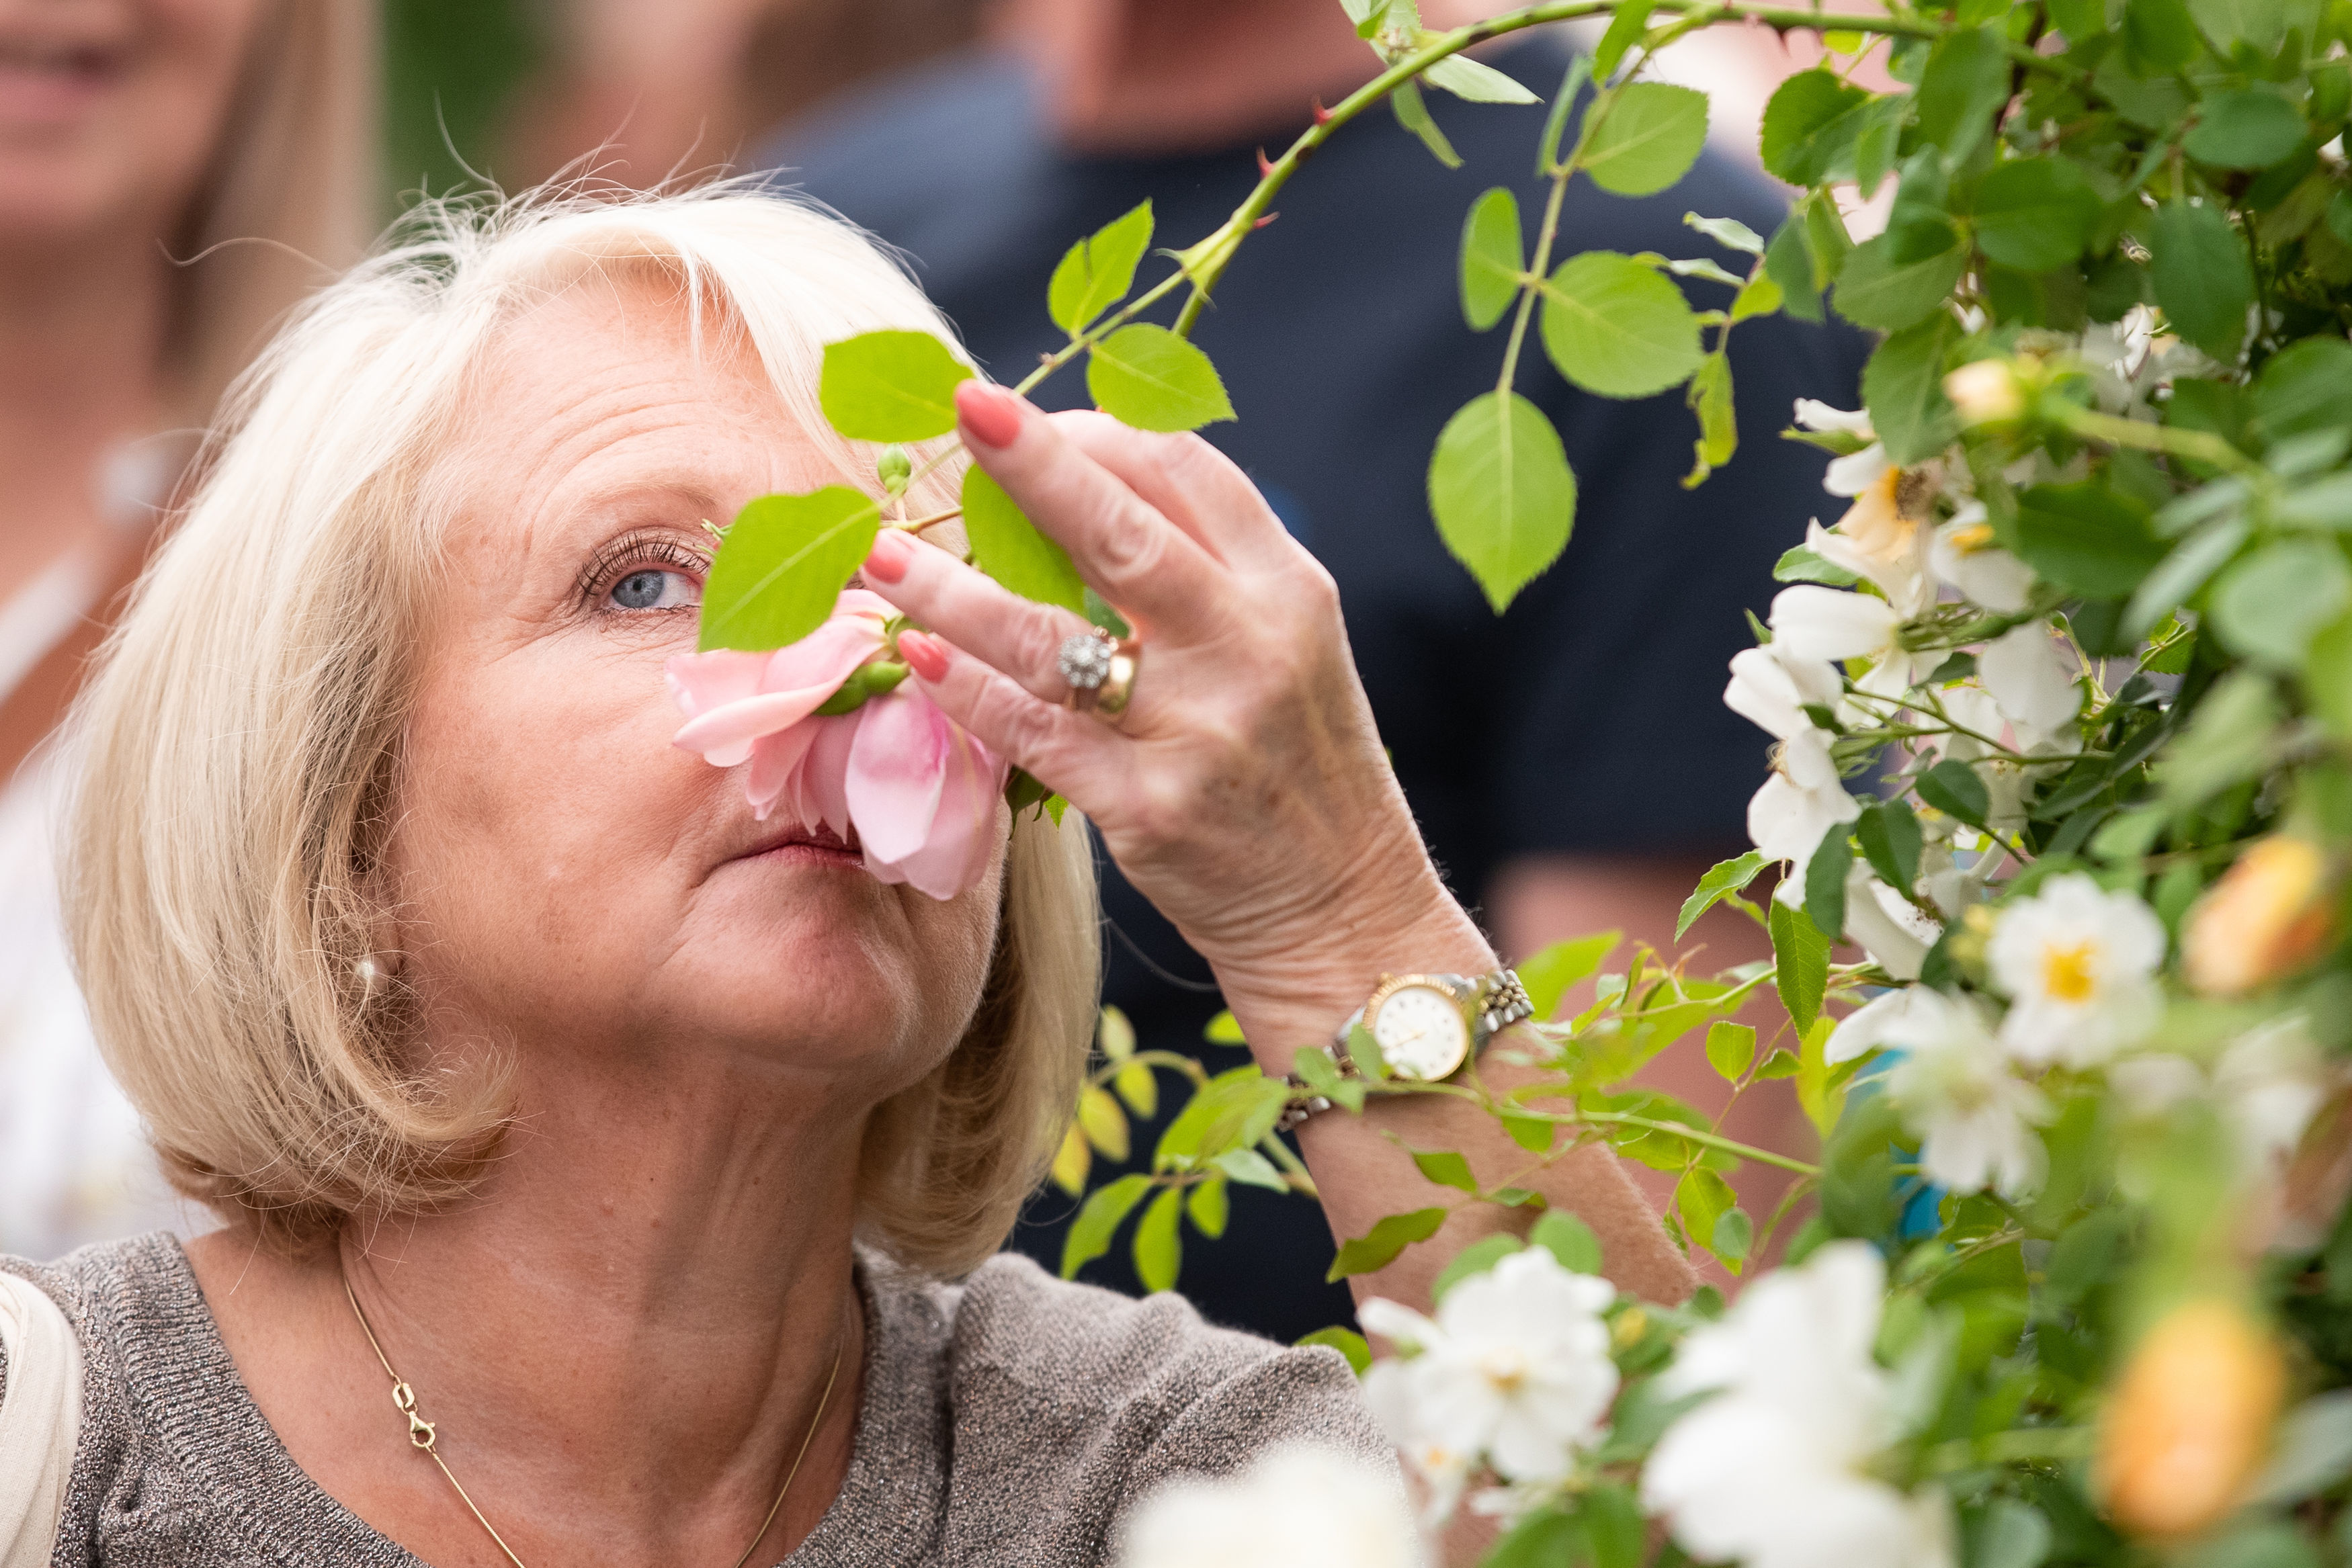 A visitor smells a rose as the doors open to the public at the RHS Chelsea Flower Show at the Royal Hospital Chelsea, London